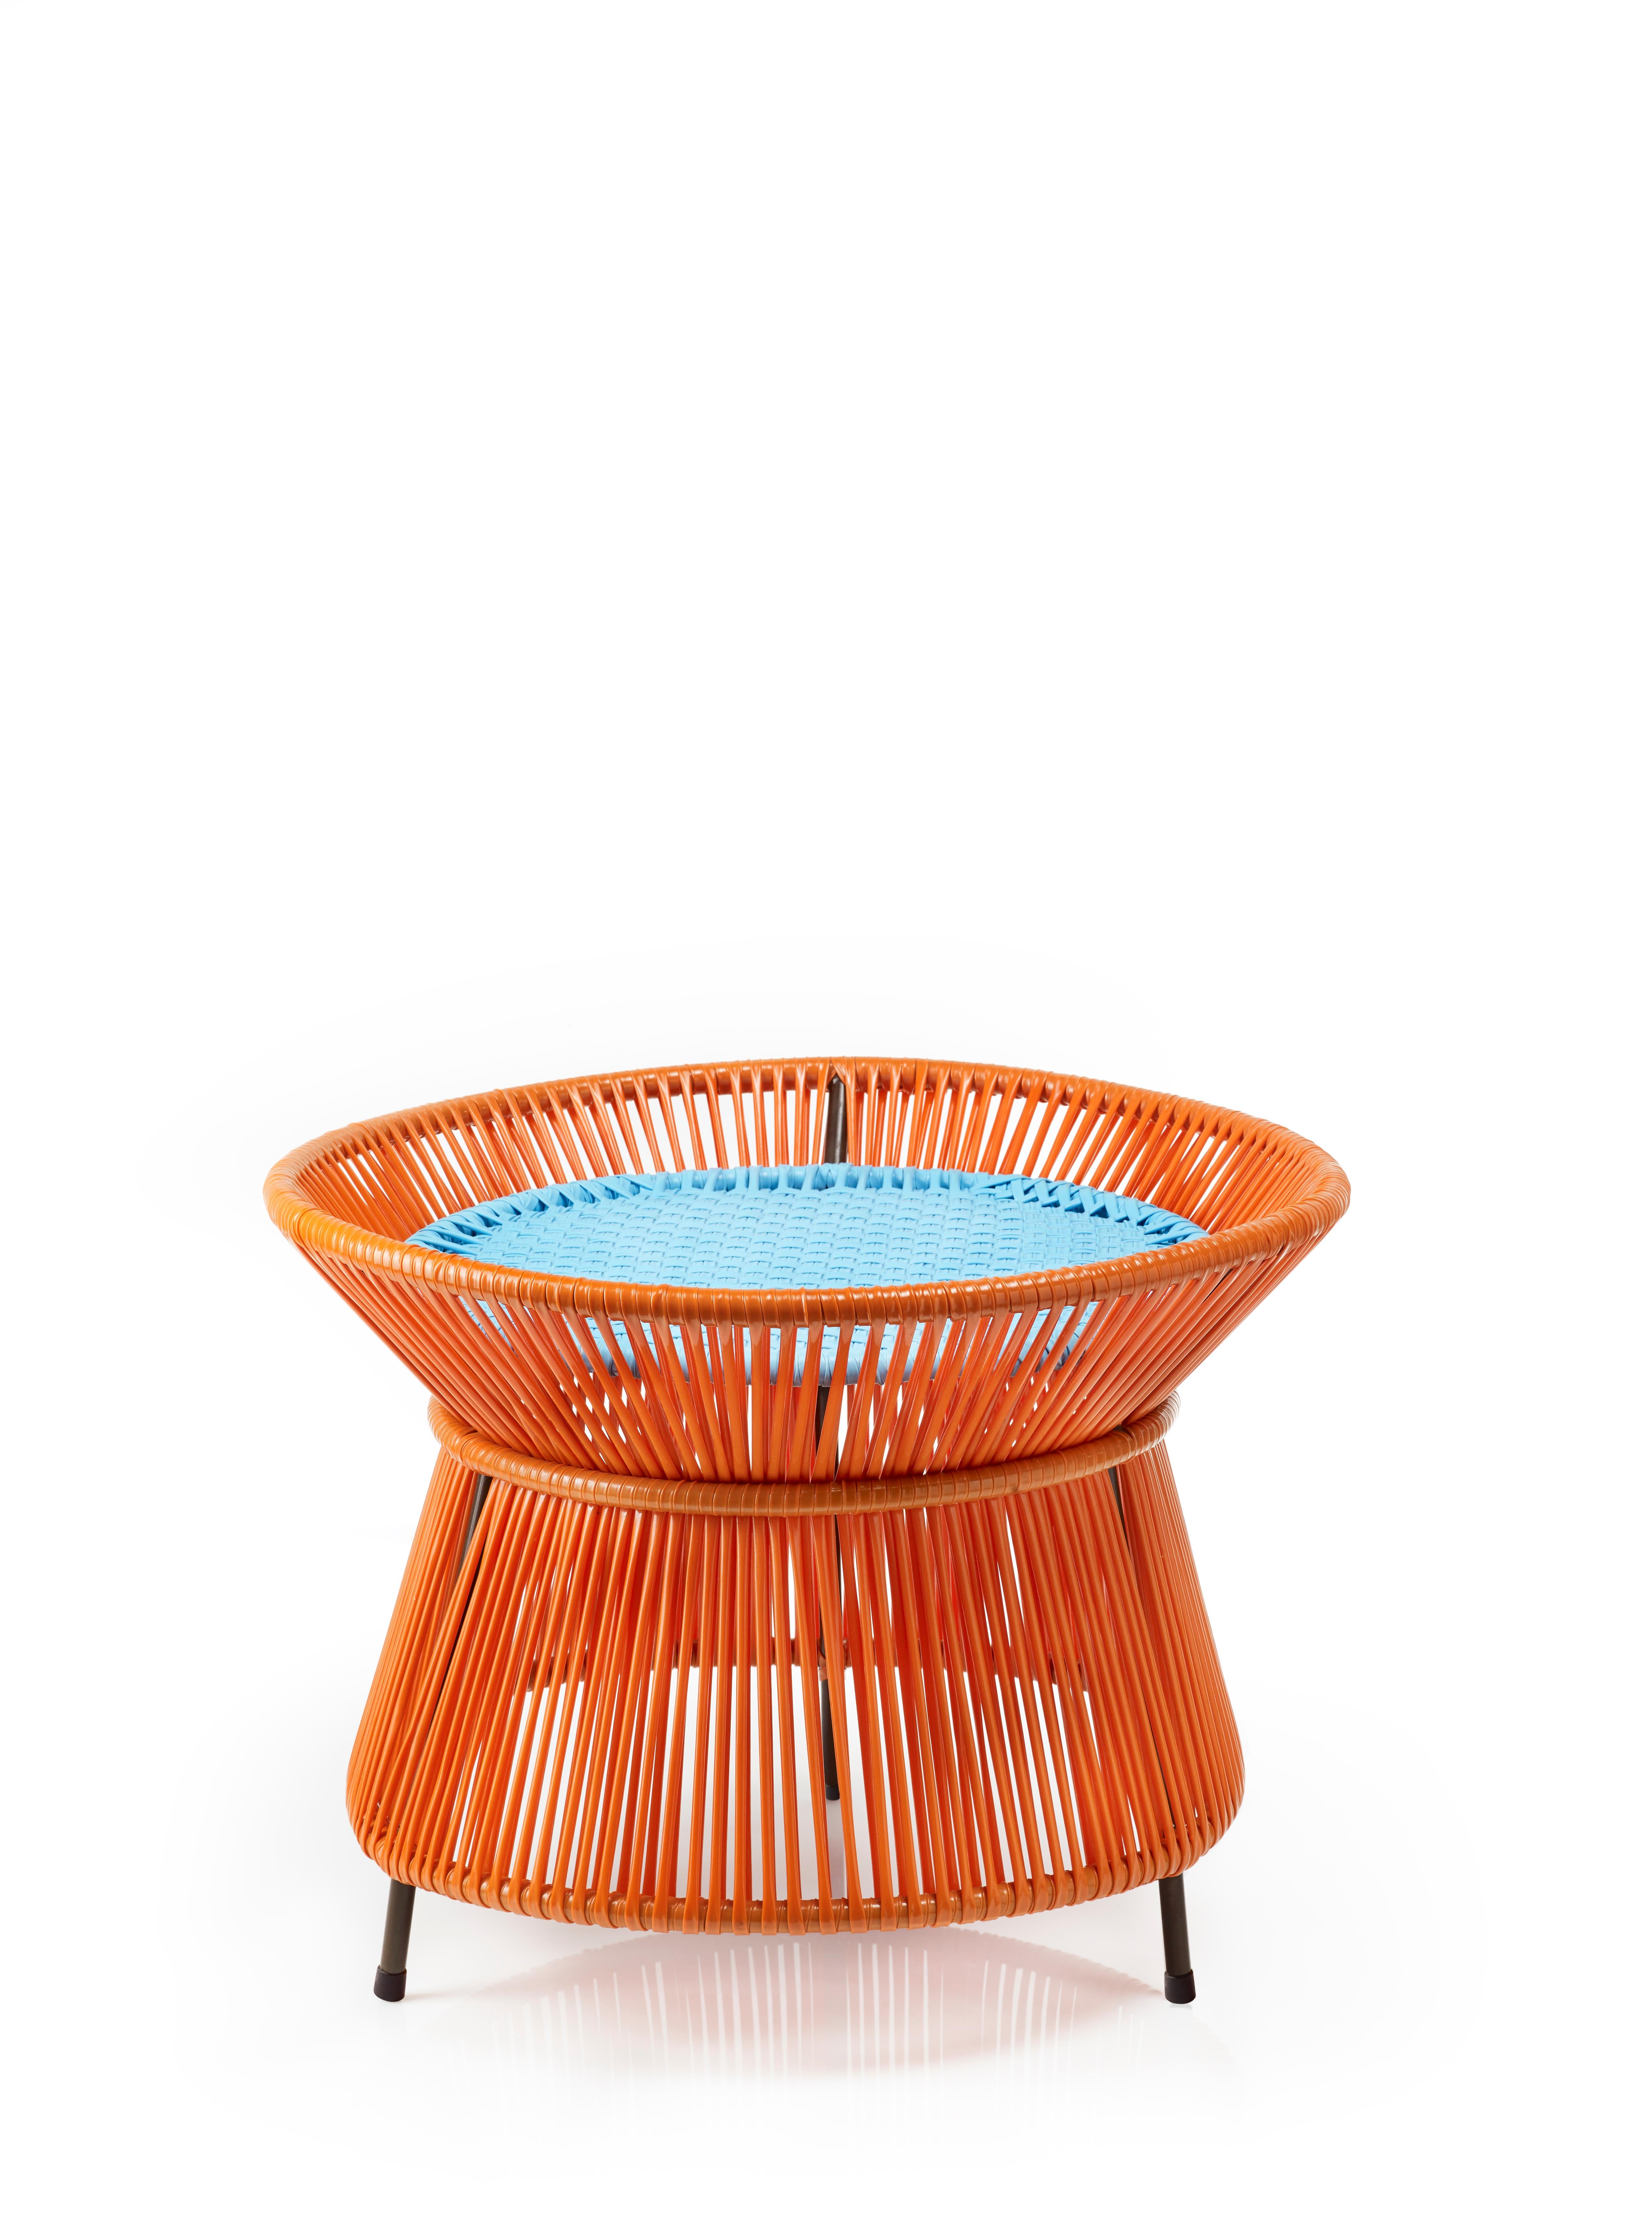 Orange Mint Caribe basket table by Sebastian Herkner
Materials: Galvanized and powder-coated tubular steel. PVC strings are made from recycled plastic.
Technique: Made from recycled plastic and weaved by local craftspeople in Colombia. 
Dimensions: